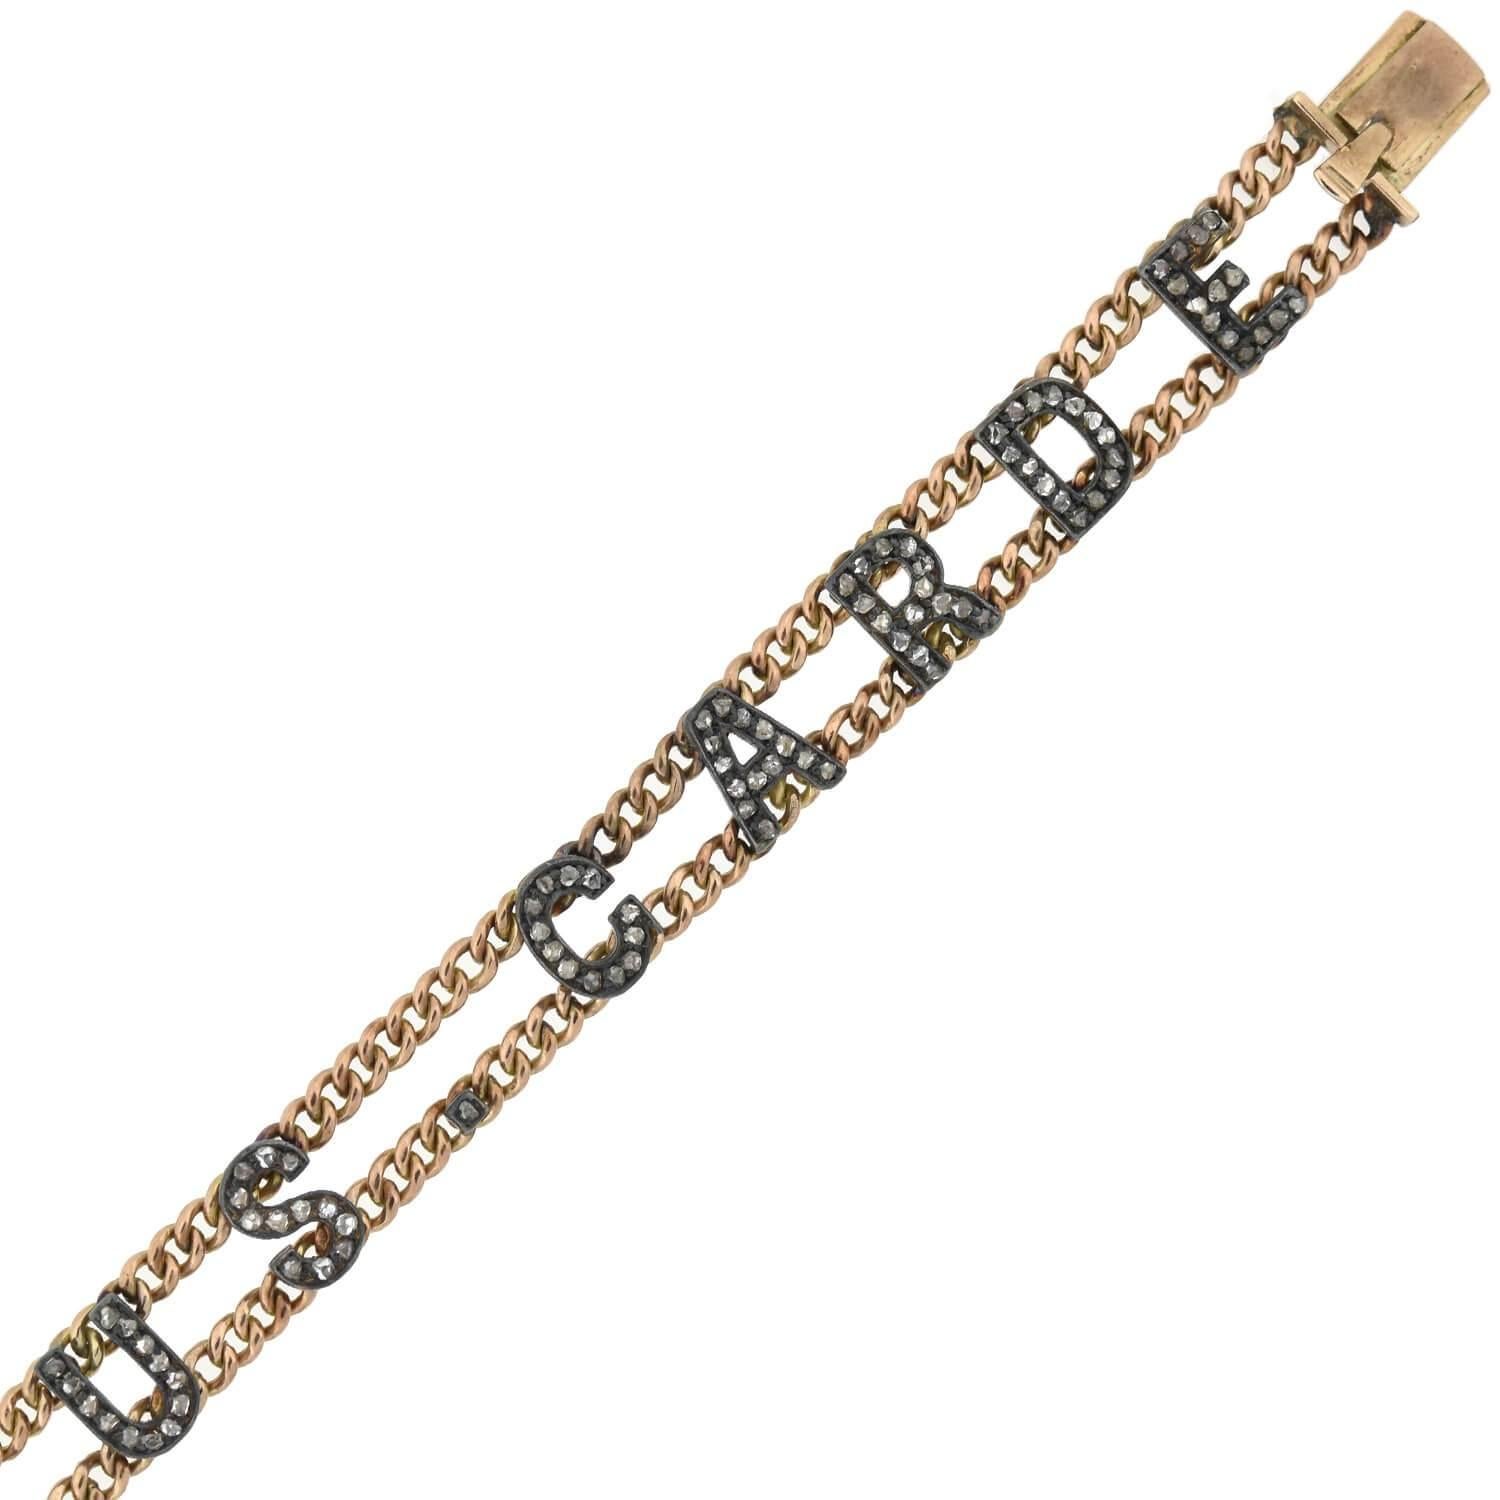 A stunning and unique diamond link bracelet from the Late Victorian (ca1900) era! This fabulous piece is crafted in 18kt rose gold and sterling silver, and displays a bold yet elegant design. The bracelet features 13 sterling links which spell out